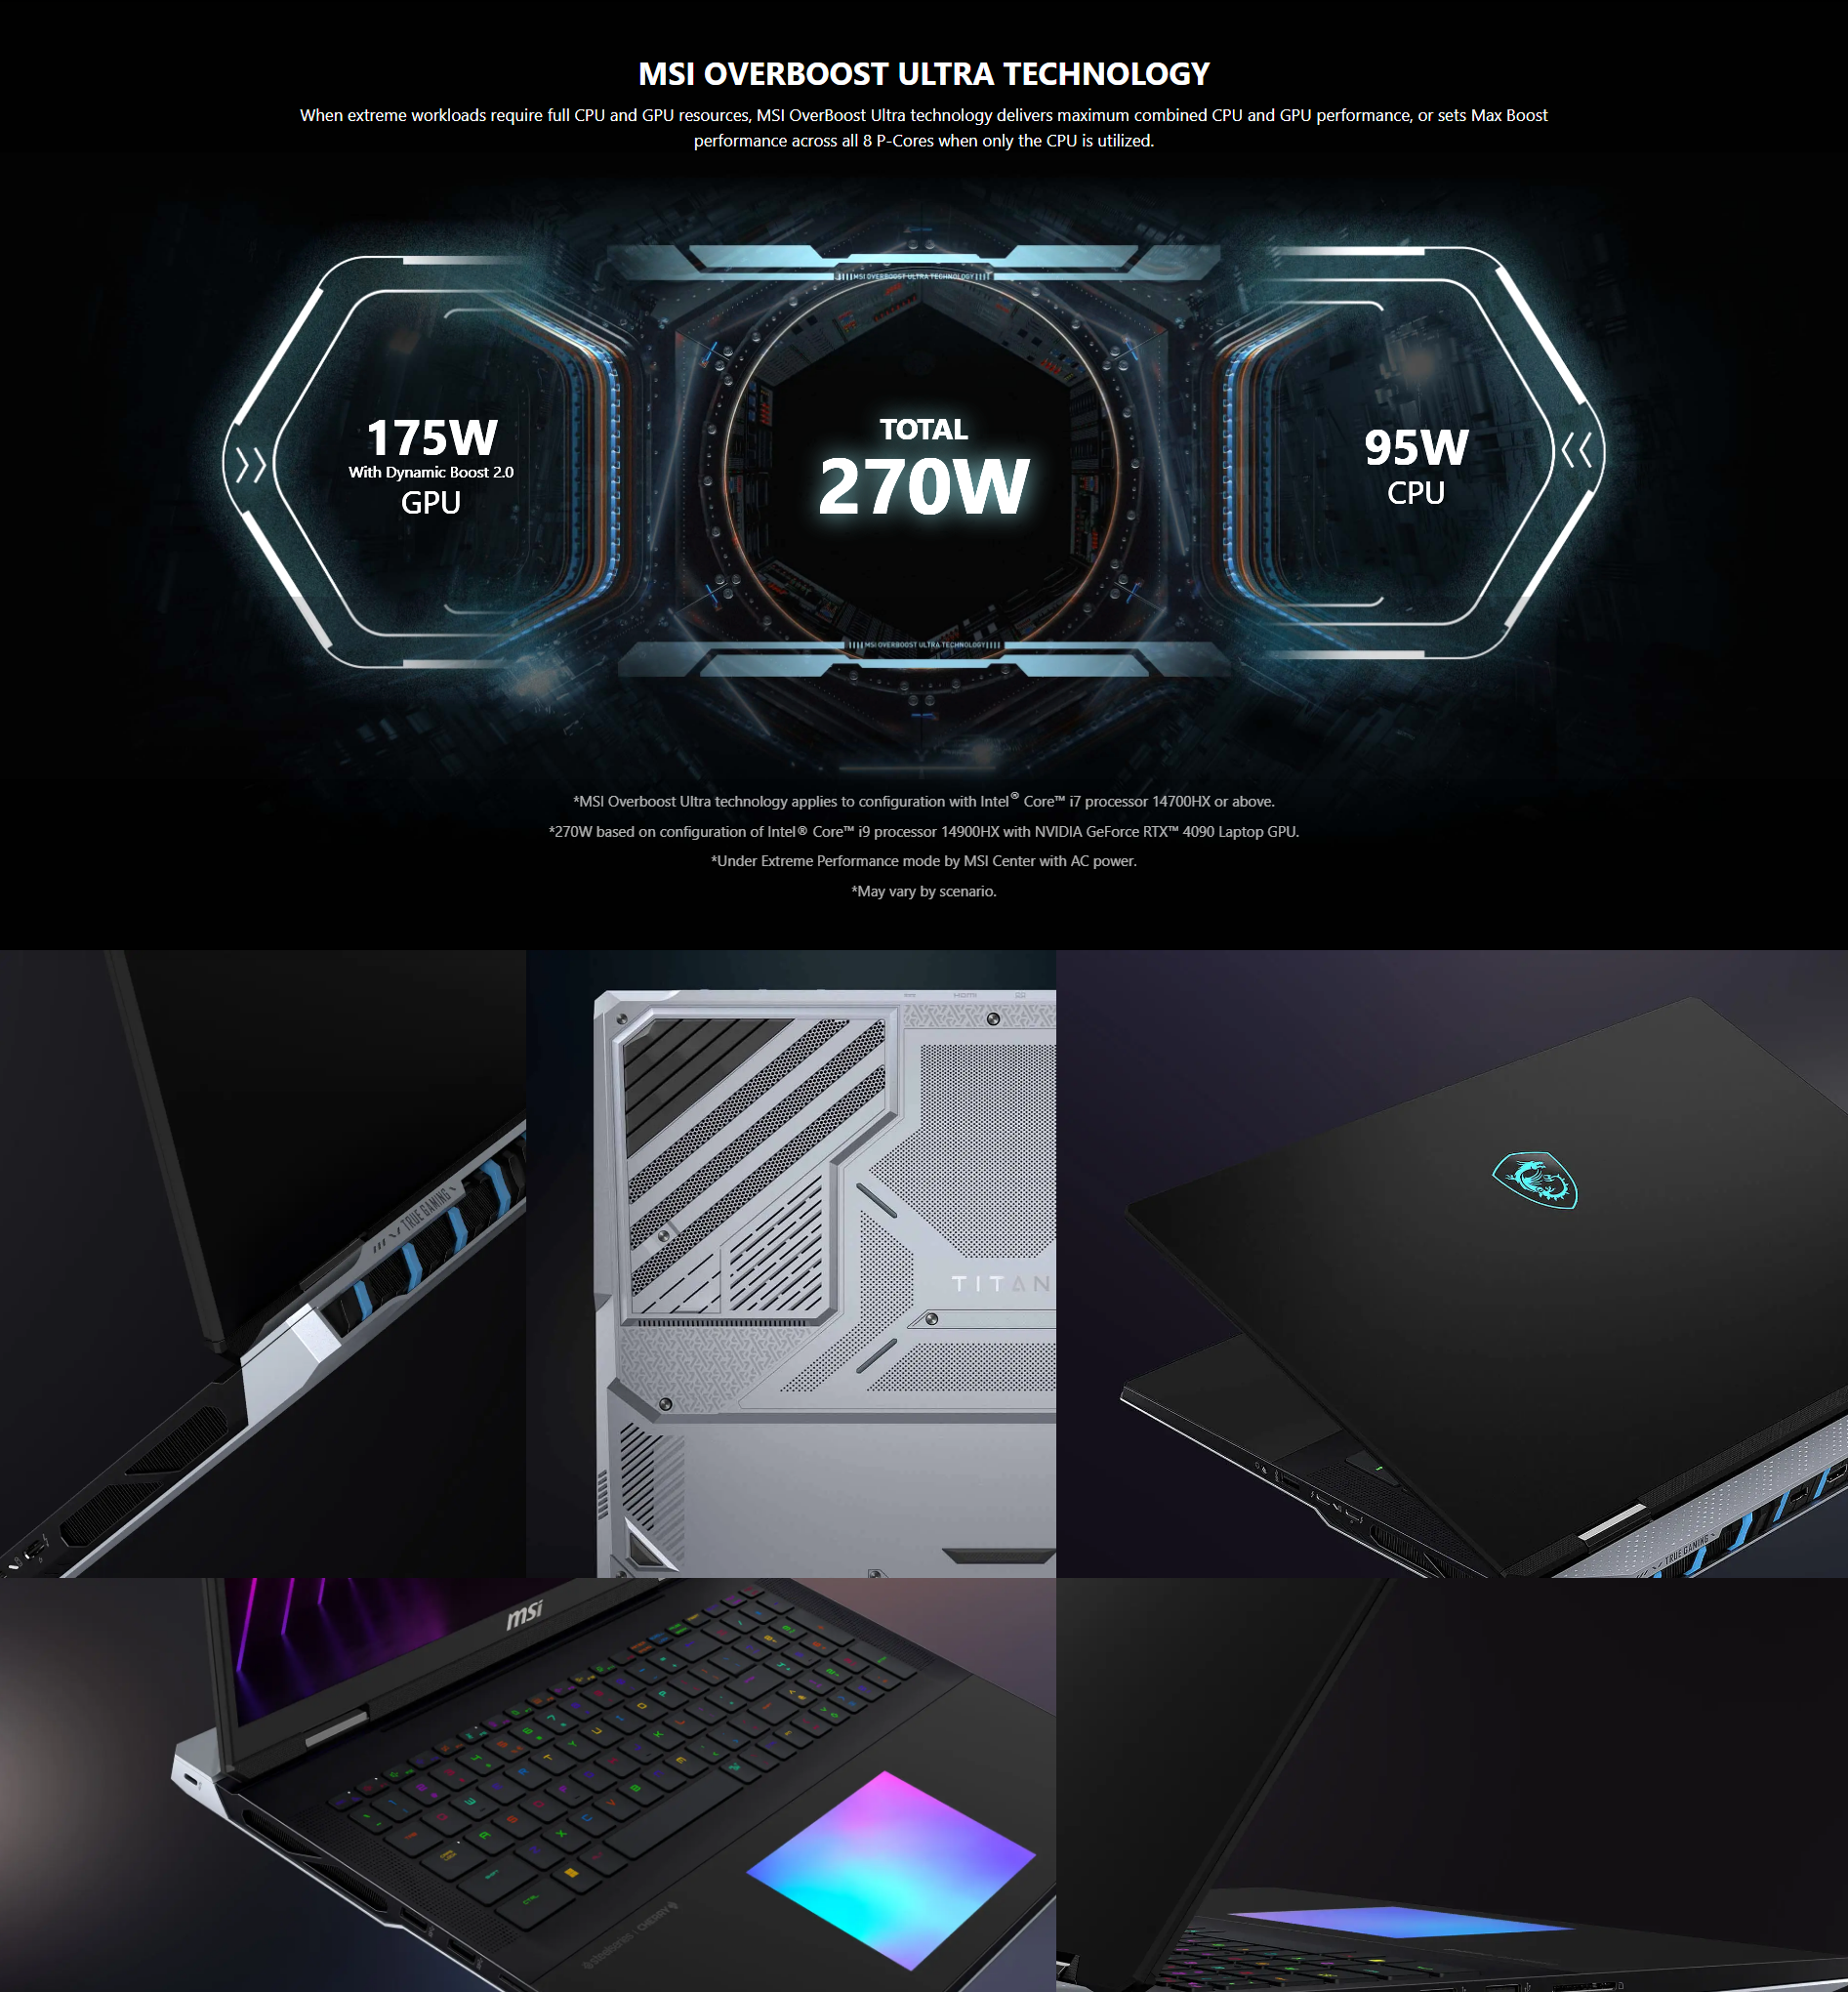 A large marketing image providing additional information about the product MSI Titan18 HX A14VIG-052AU 18" MiniLED 120Hz 14th Gen i9 14900HX RTX 4090 Win 11 Gaming Notebook - Additional alt info not provided